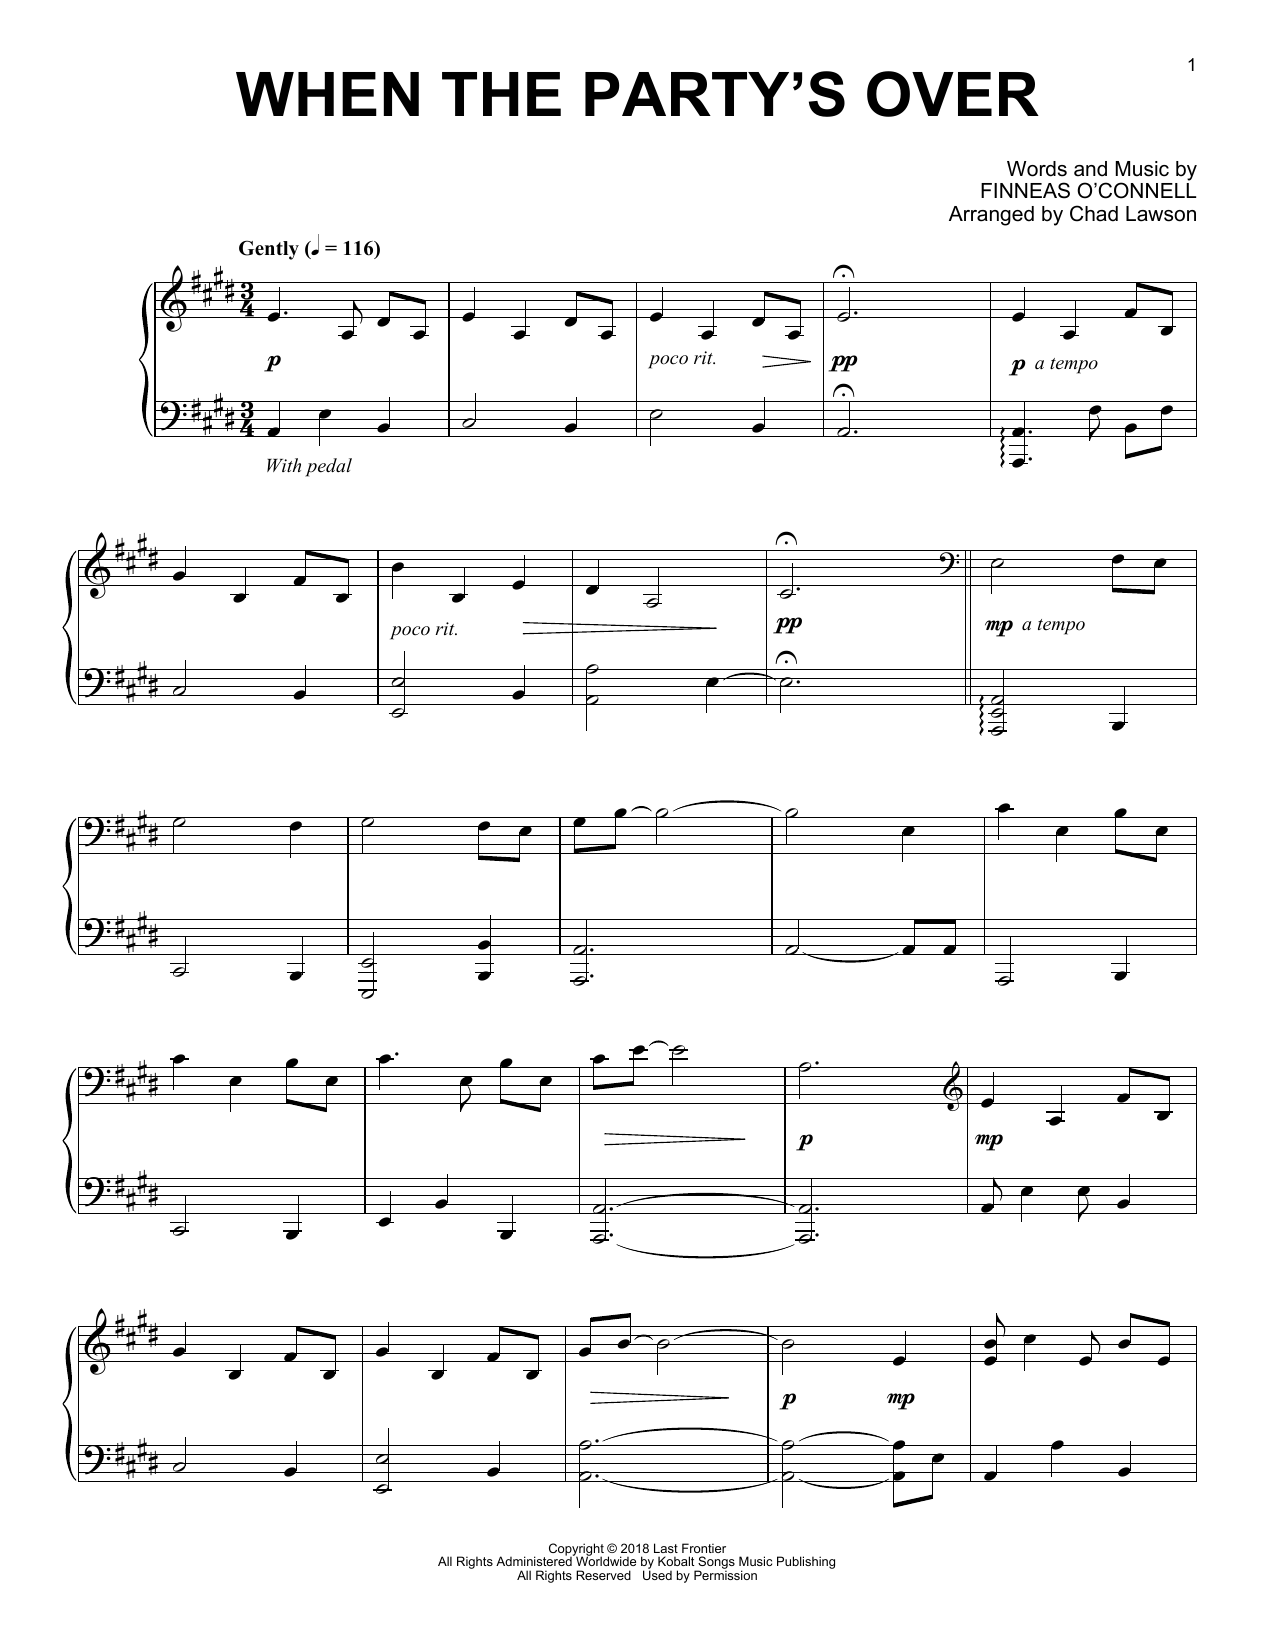 Download Billie Eilish when the party's over (arr. Chad Lawson Sheet Music